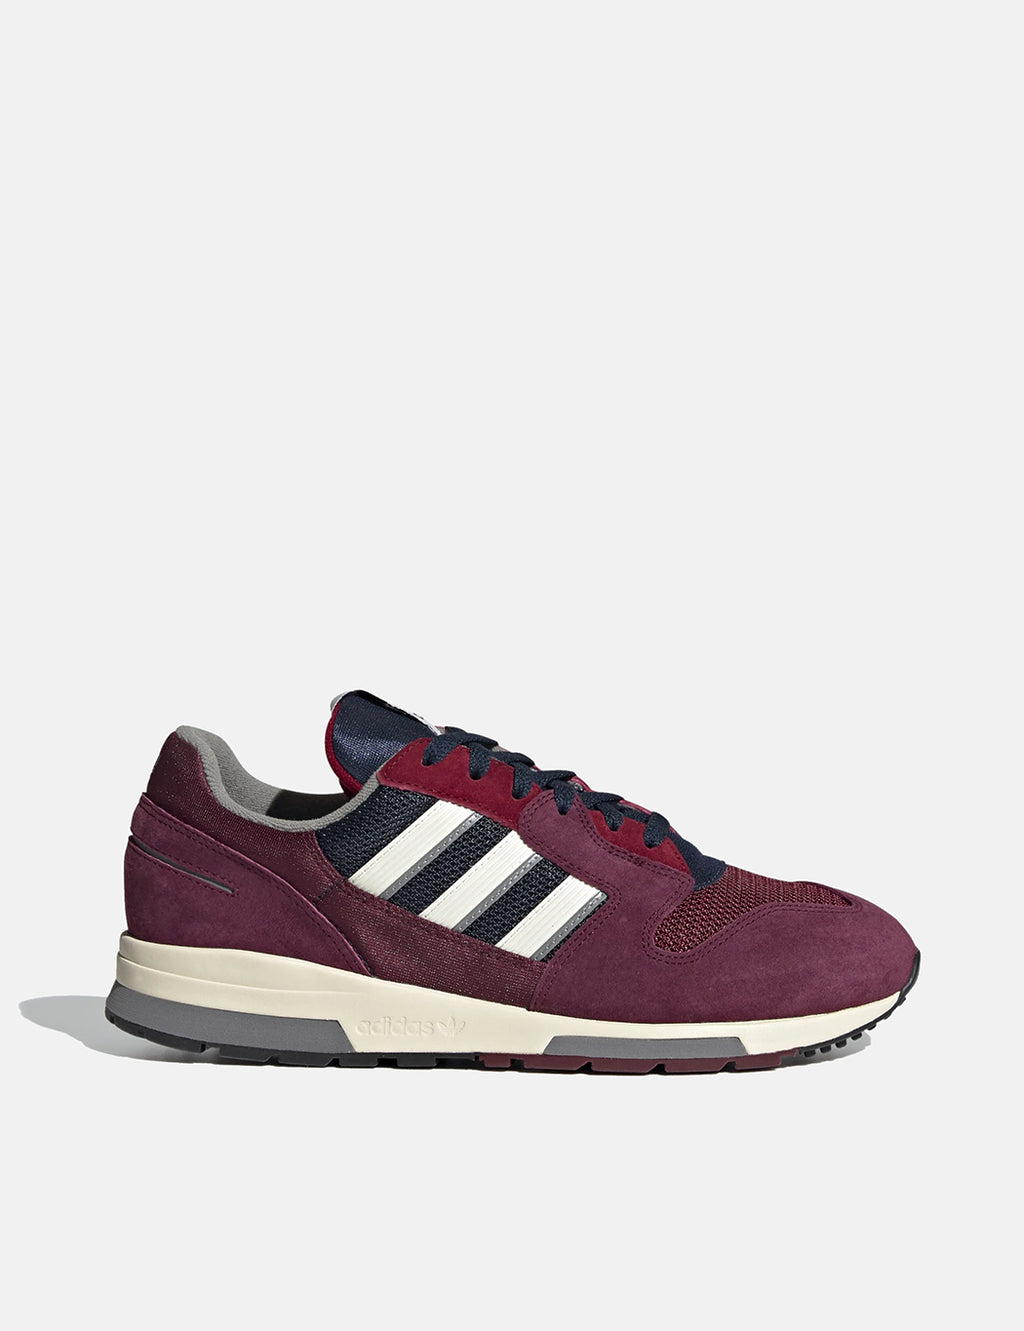 Trainers (FZ0146) - Maroon/Off | URBAN EXCESS – URBAN EXCESS USA